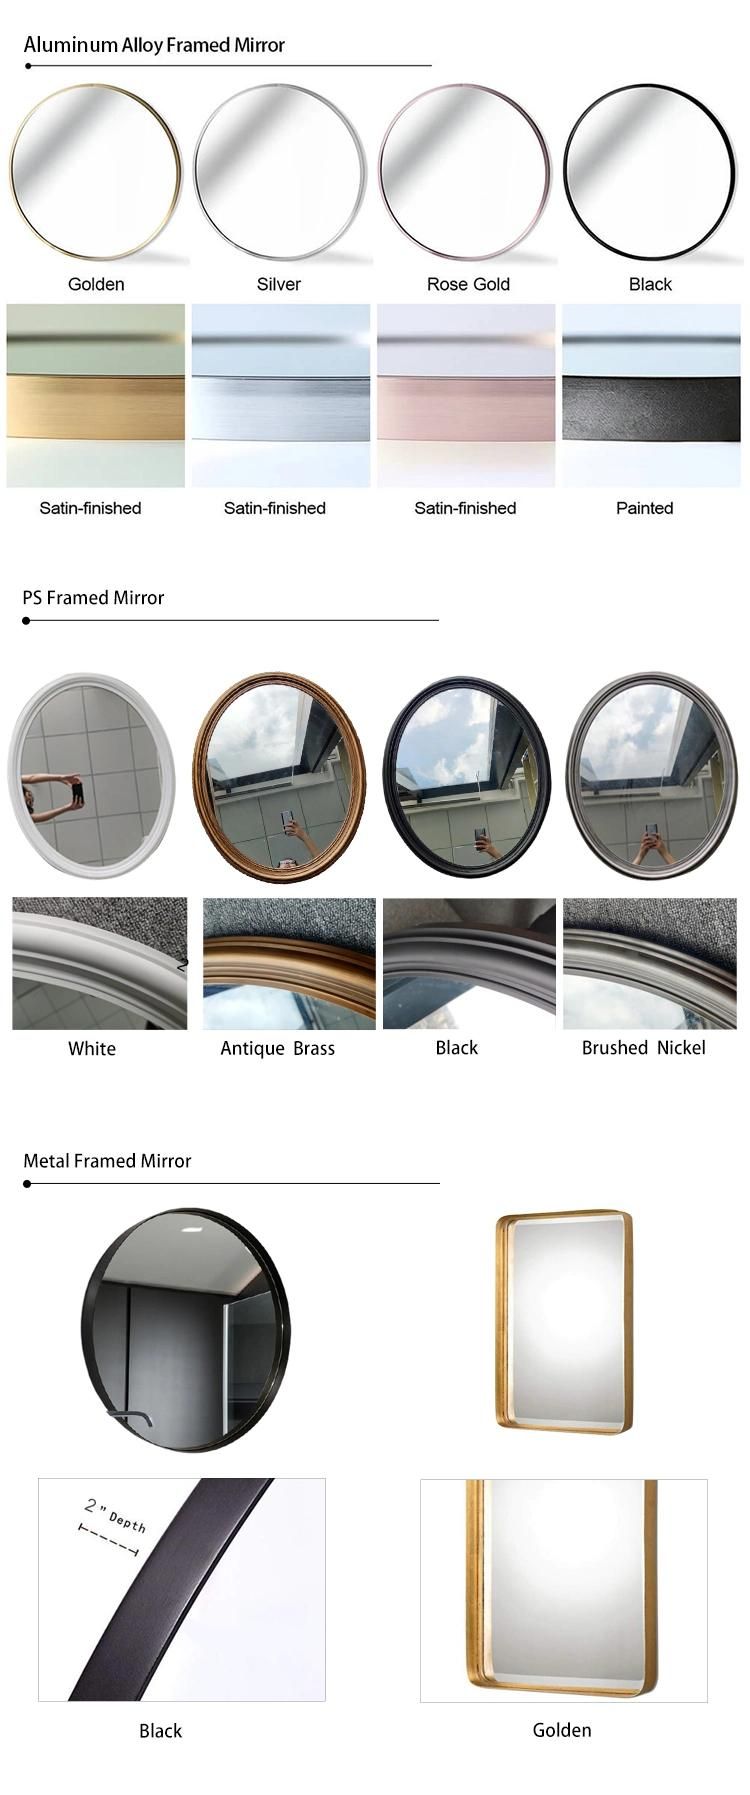 Customized Sanitary Ware New Products Glass Mirror From China Leading Supplier with High Quality